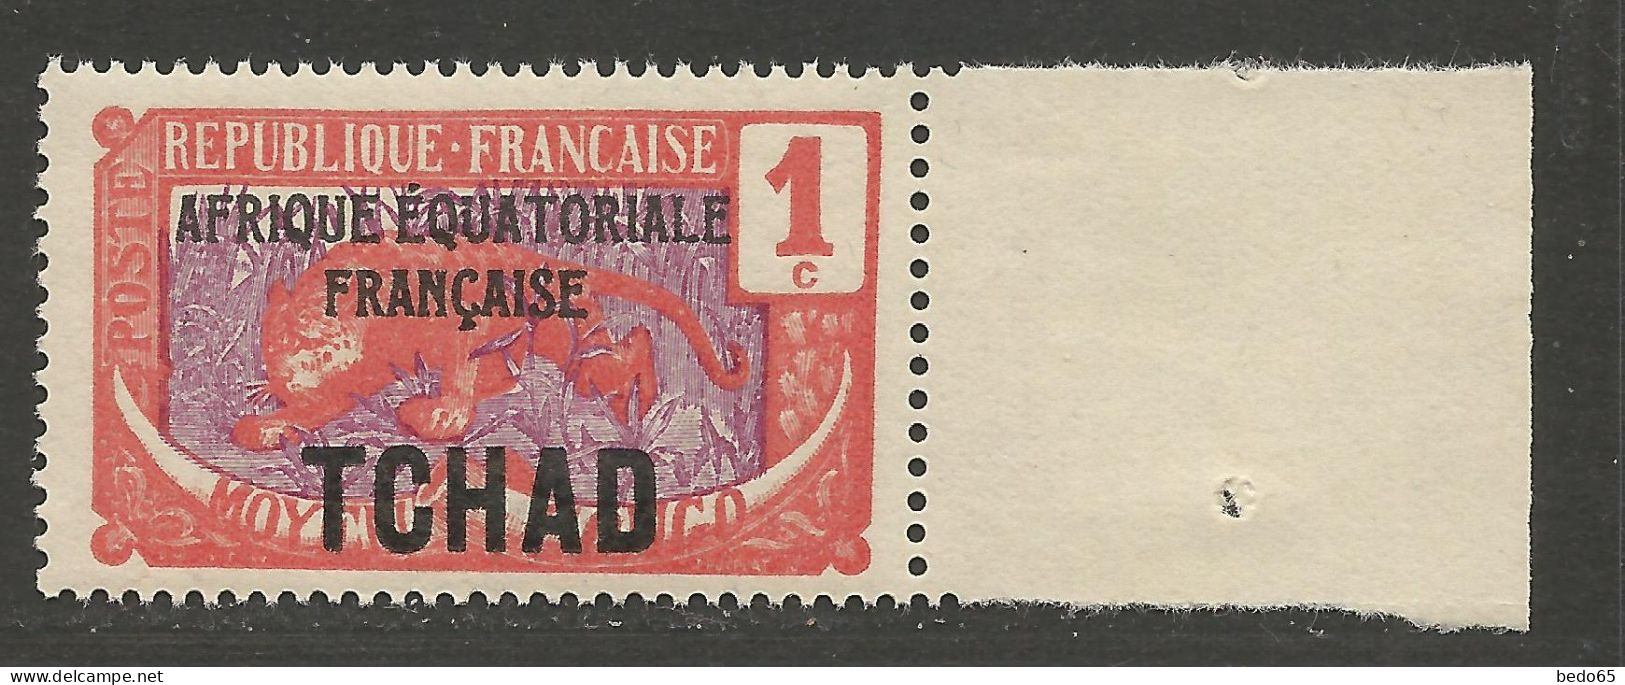 TCHAD N° 19 NEUF** LUXE SANS CHARNIERE / Hingeless / MNH - Unused Stamps